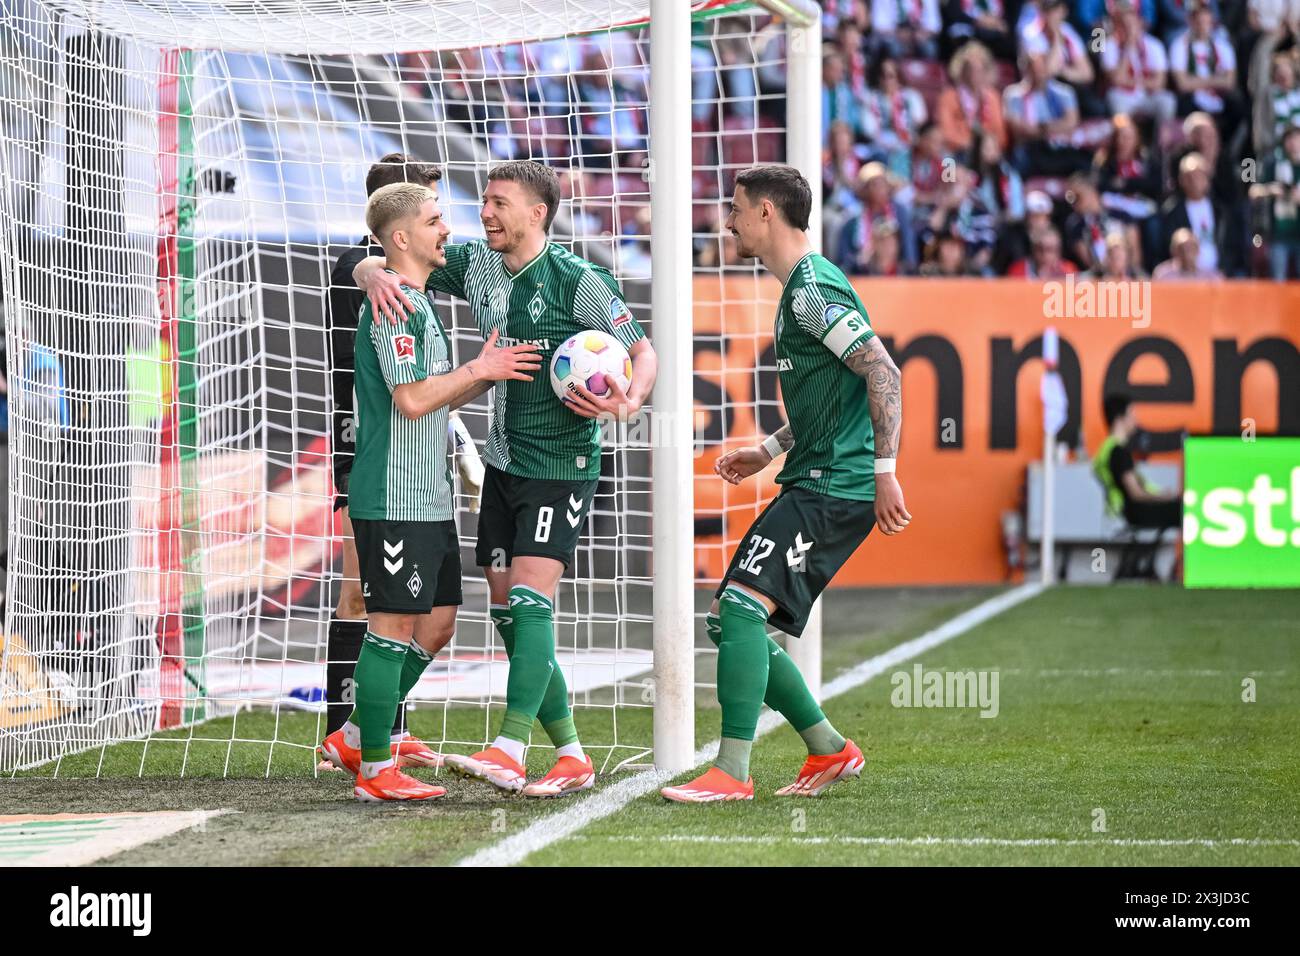 Augsburg, Germany. 27th Apr, 2024. Soccer: Bundesliga, FC Augsburg - Werder Bremen, Matchday 31, WWK-Arena. Bremen's Romano Schmid (l) Bremen's Mitchell Weiser (M) and Bremen's Marco Friedelr (r) celebrate after scoring the 0:2 goal. Credit: Harry Langer/dpa - IMPORTANT NOTE: In accordance with the regulations of the DFL German Football League and the DFB German Football Association, it is prohibited to utilize or have utilized photographs taken in the stadium and/or of the match in the form of sequential images and/or video-like photo series./dpa/Alamy Live News Stock Photo